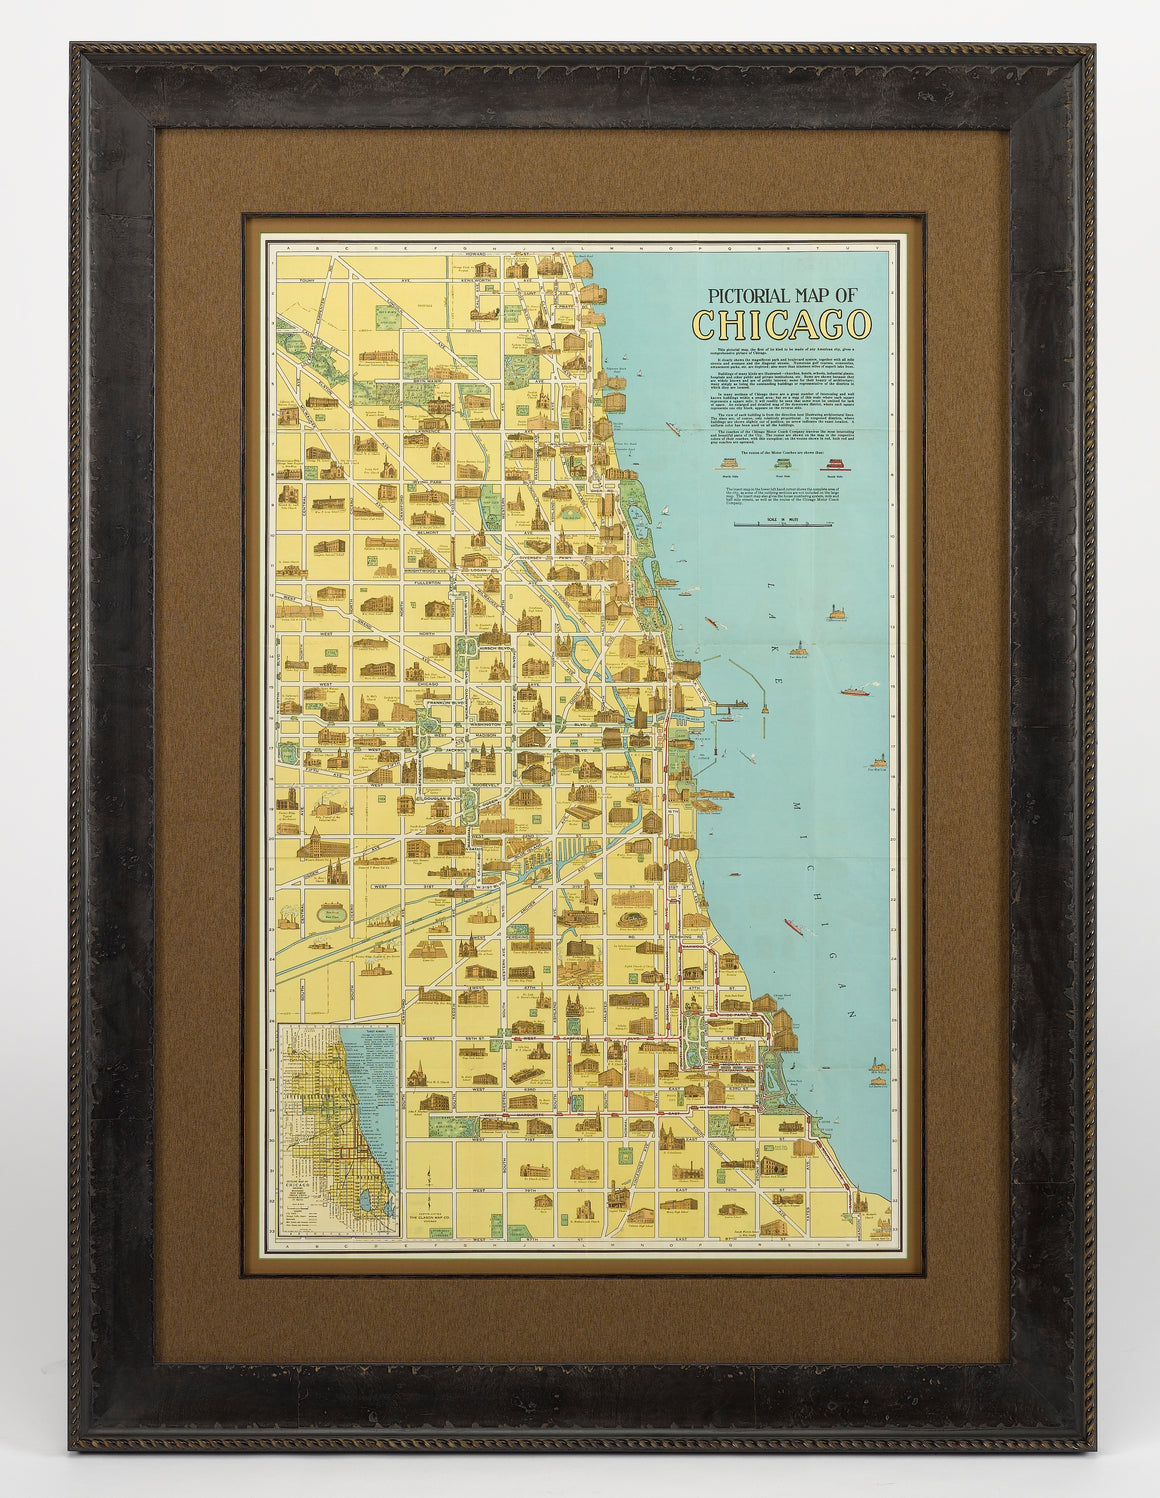 1926 "Pictorial Map of Chicago" by The Clason Map Co.